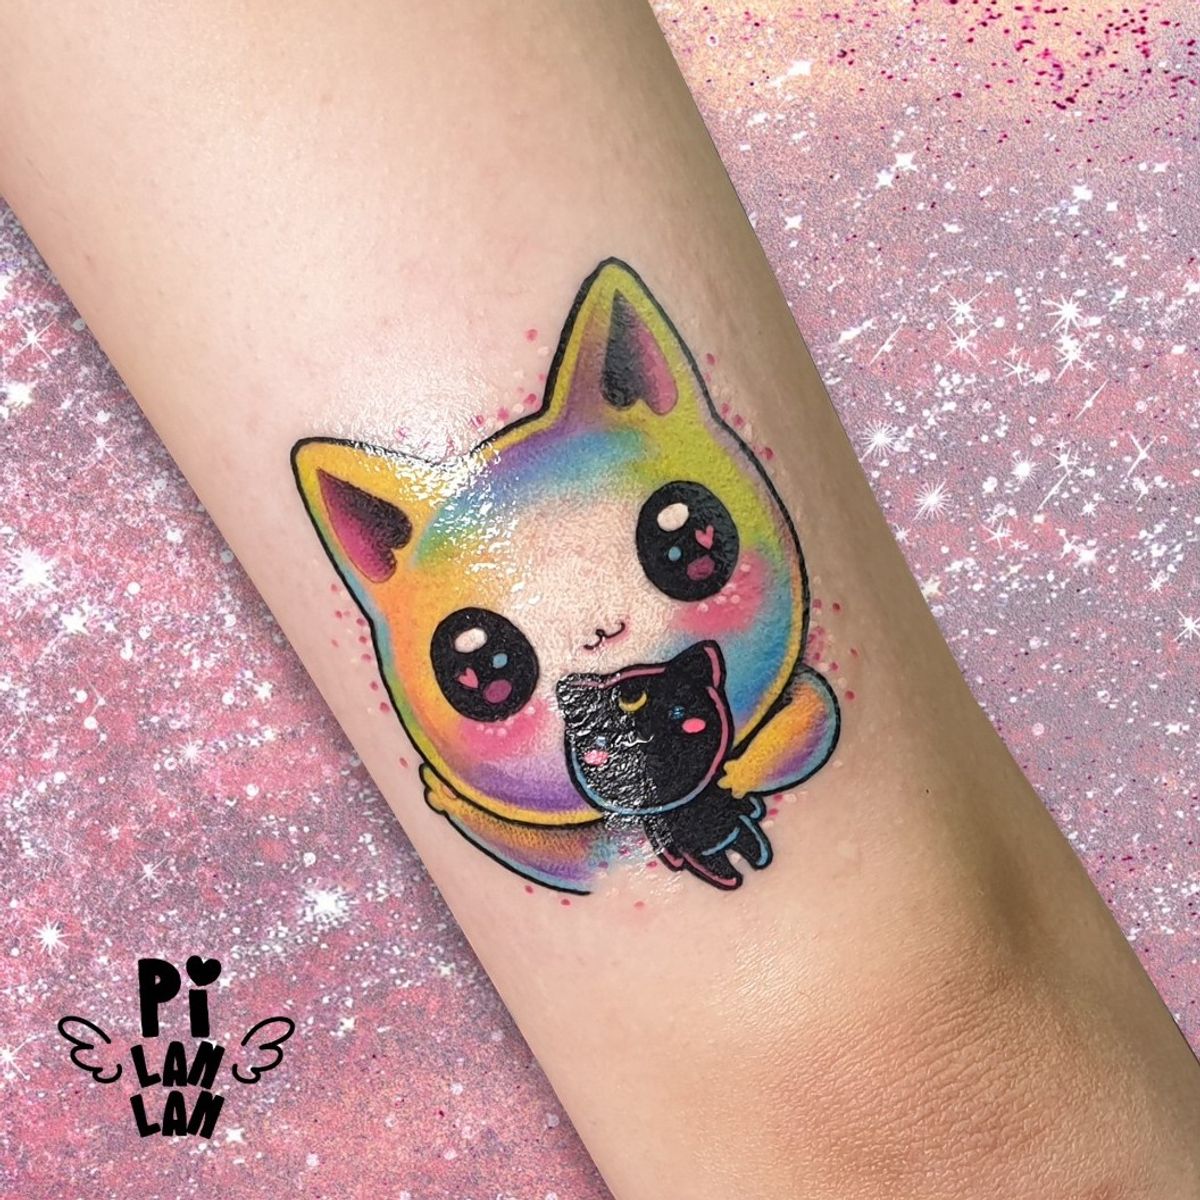 Tattoo Uploaded By Pi Lanlan 💛💚💙💜💛💚💙💜💛💚💙💜💛💚💙💜💛 The Rainbow Kitty And The Black Kitty 🖤🖤🖤🖤🖤🖤🖤